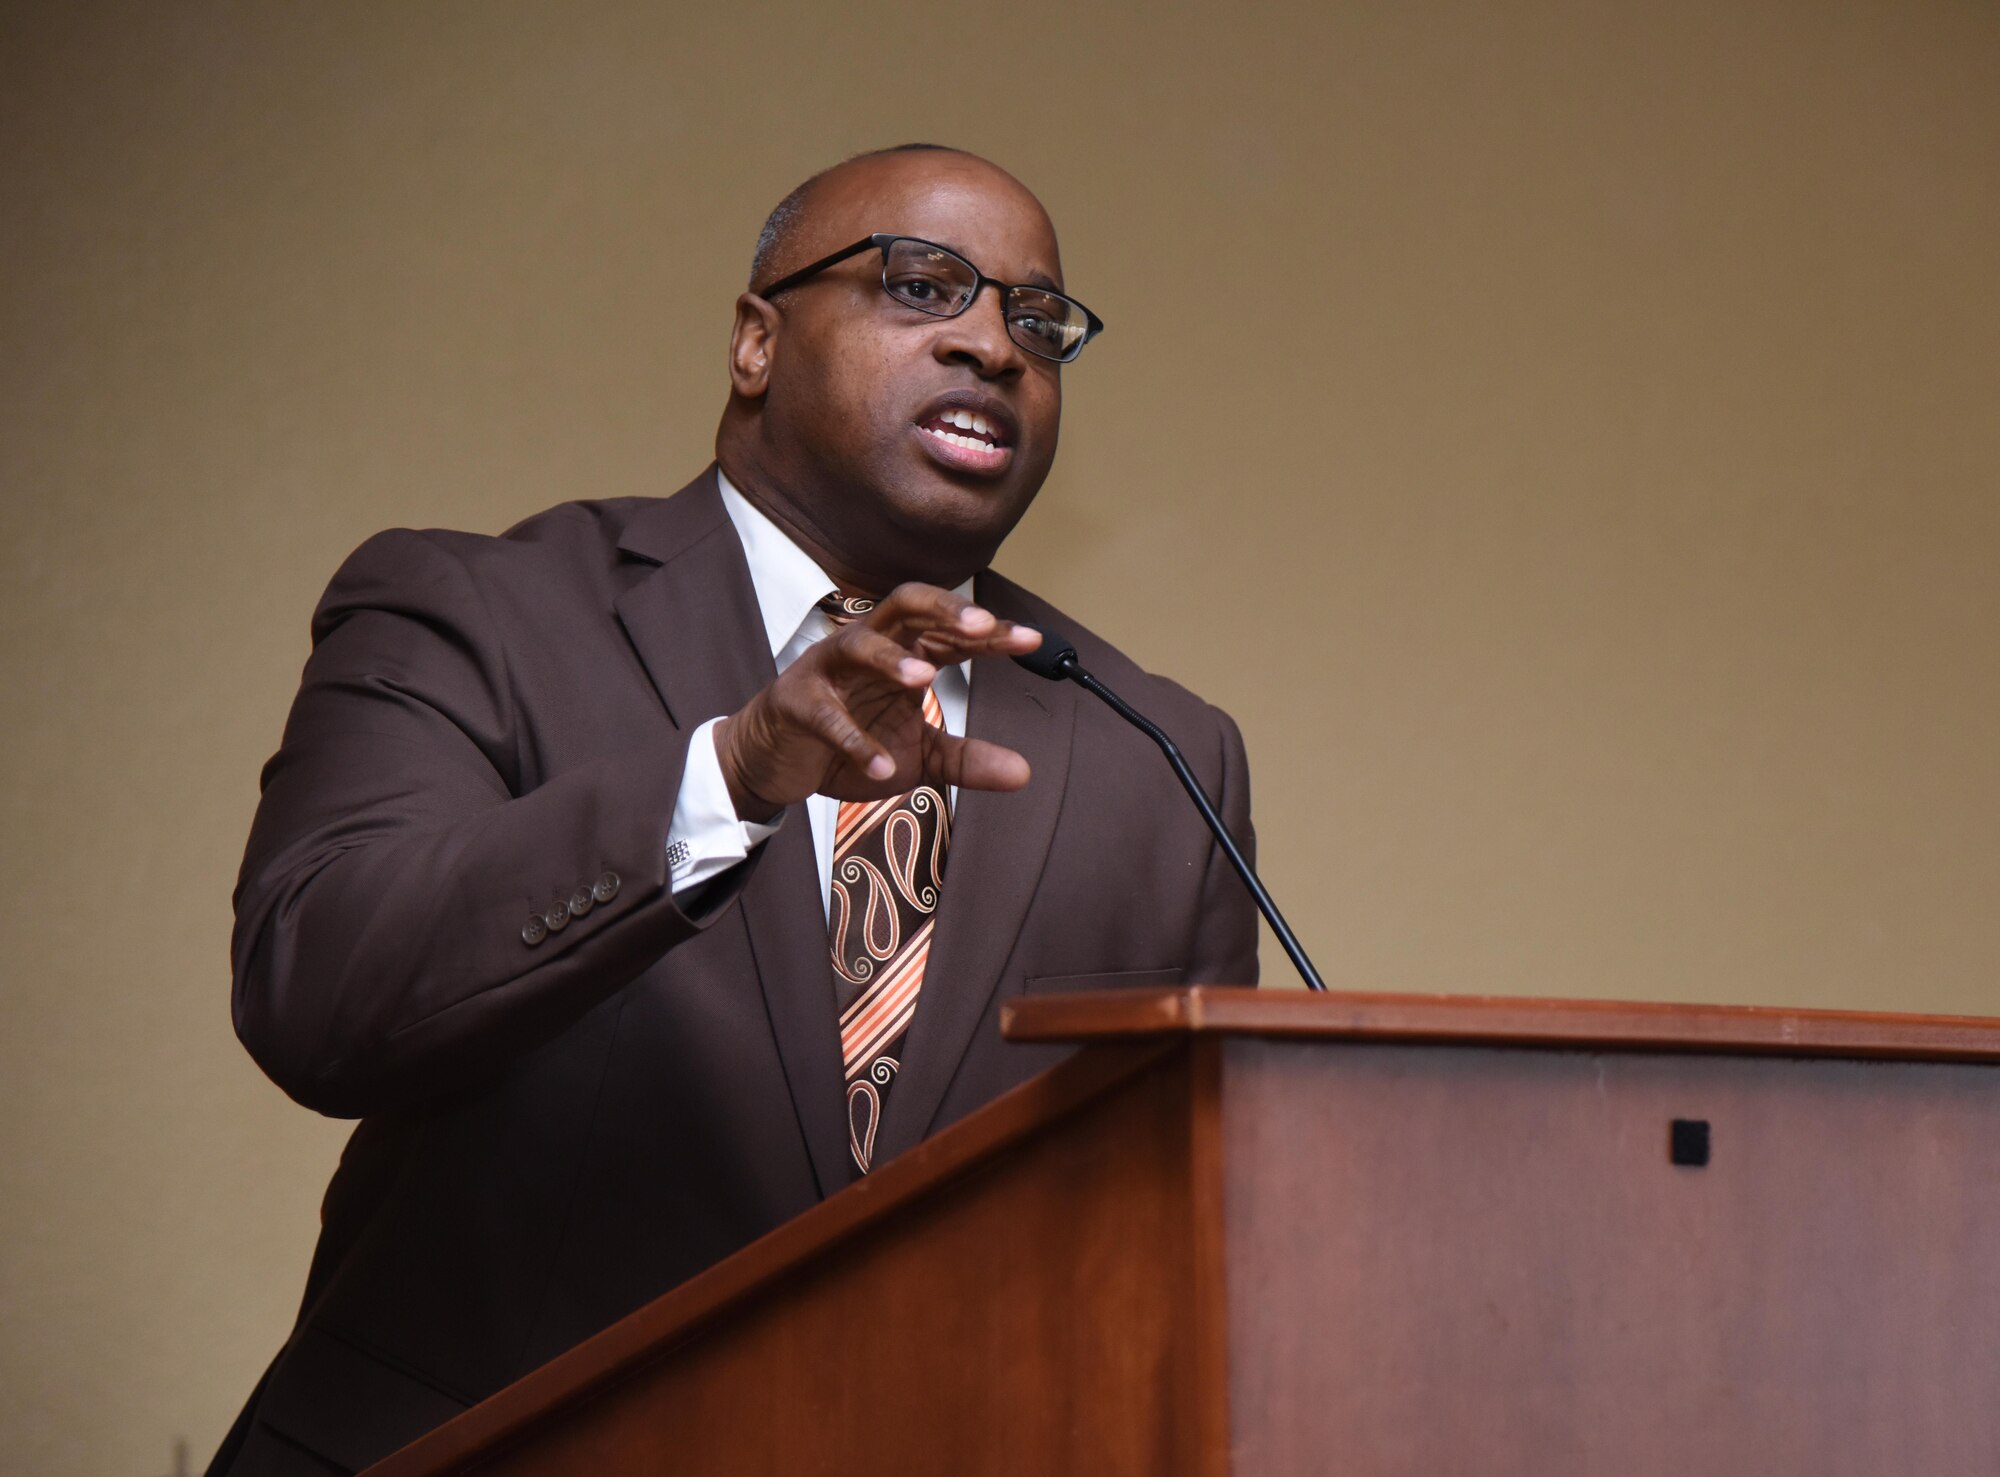 Rev. Eric Dickey, First Missionary Baptist Church pastor, speaks at the annual Dr. Martin Luther King Jr. Memorial Luncheon at the Bay Breeze Event Center, Jan. 17, 2017, on Keesler Air Force Base, Miss. The Keesler African-American Heritage Committee sponsored event honored King’s legacy and his efforts to inspire civil rights activism within the African-American community. (U.S. Air Force photo by Kemberly Groue)